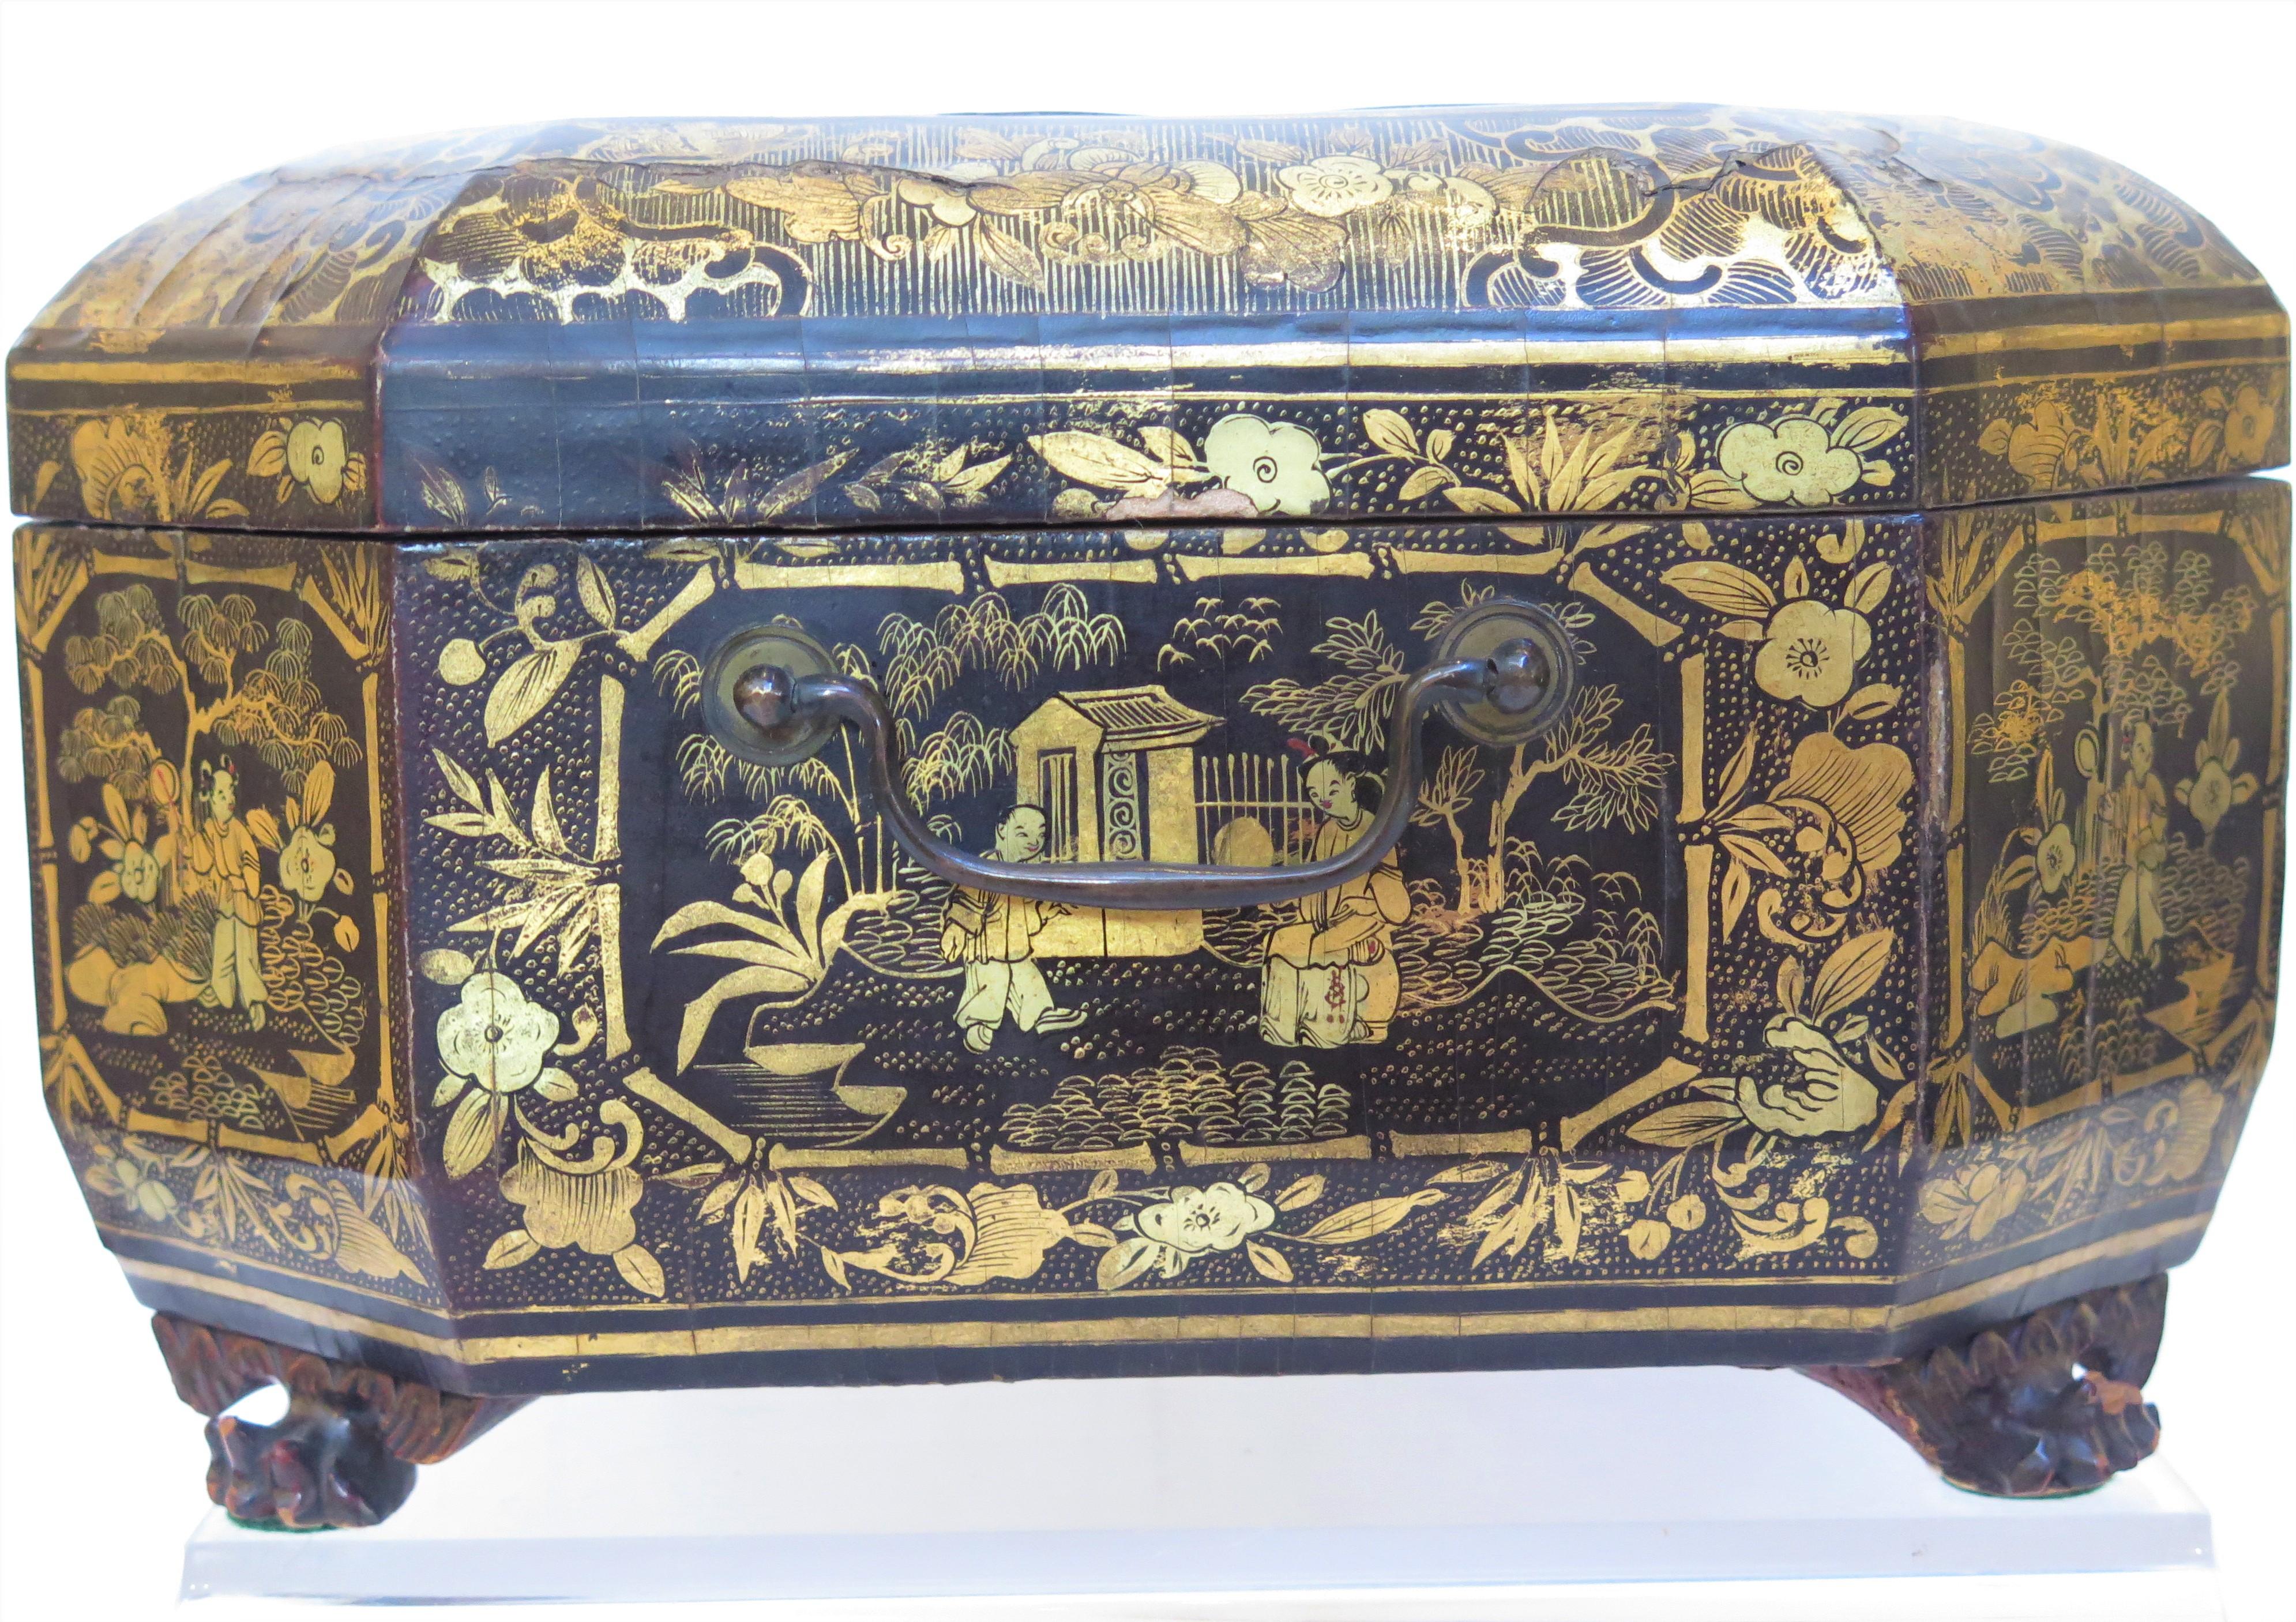 Ealy 19th Century Chinese Export Lacquer Sewing Box For Sale 6